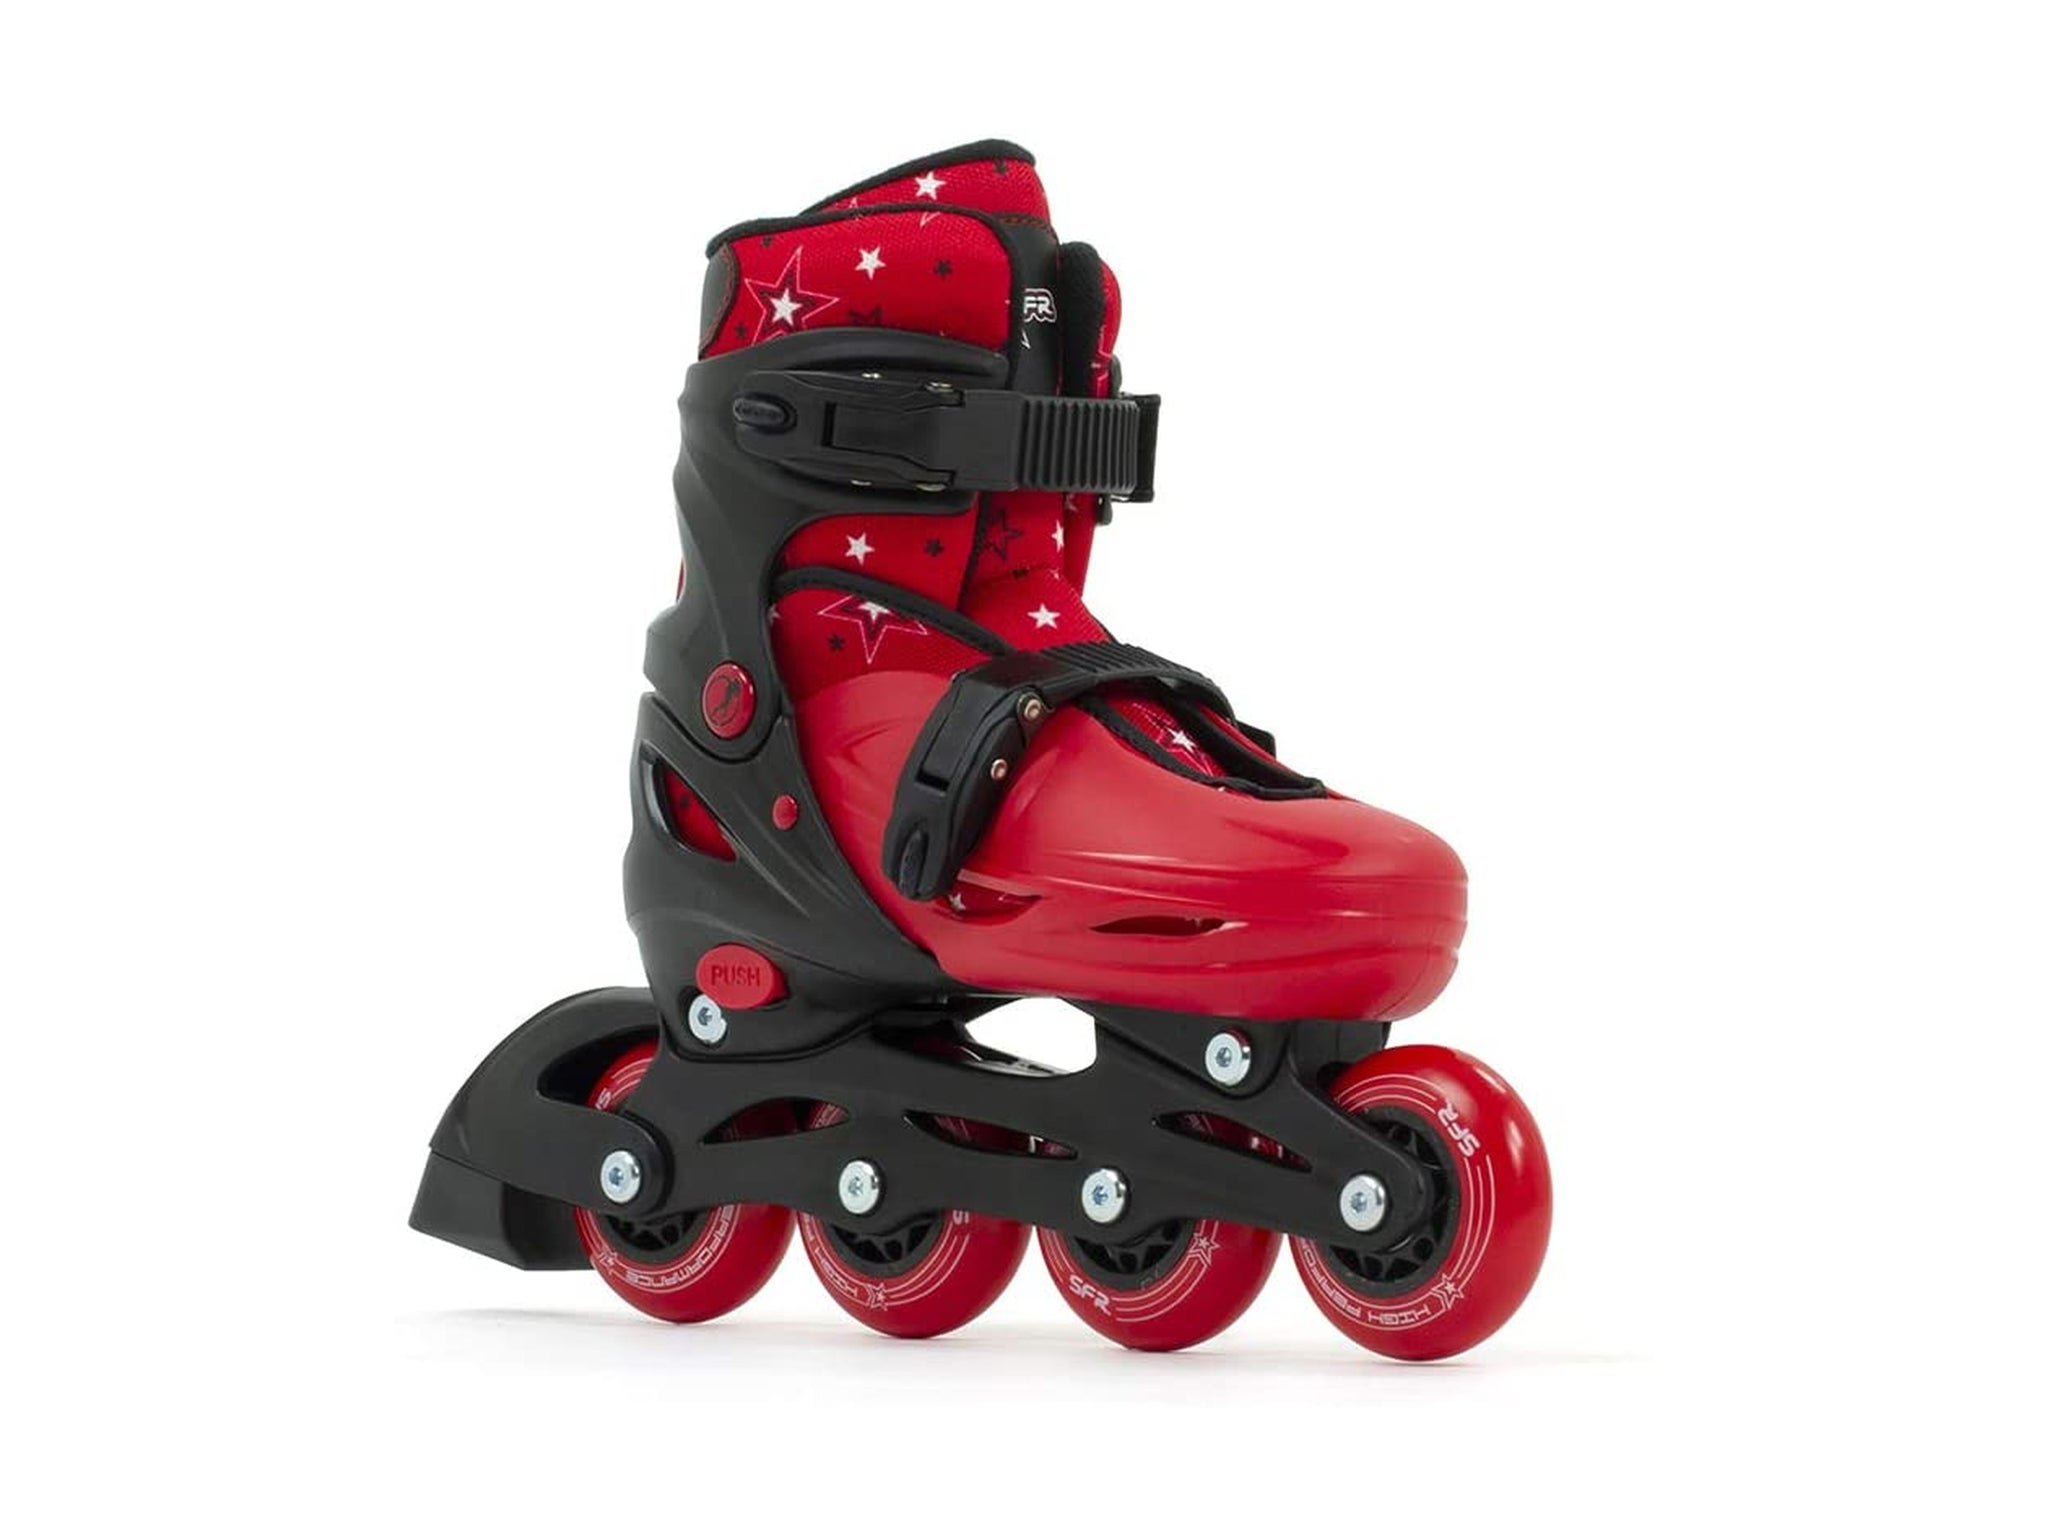 SK8 Zone Boys Red 3in1 Roller Blades Inline Quad Skates Adjustable Size Childrens Kids Pro Combo Multi Ice Skating Boots Shoes New